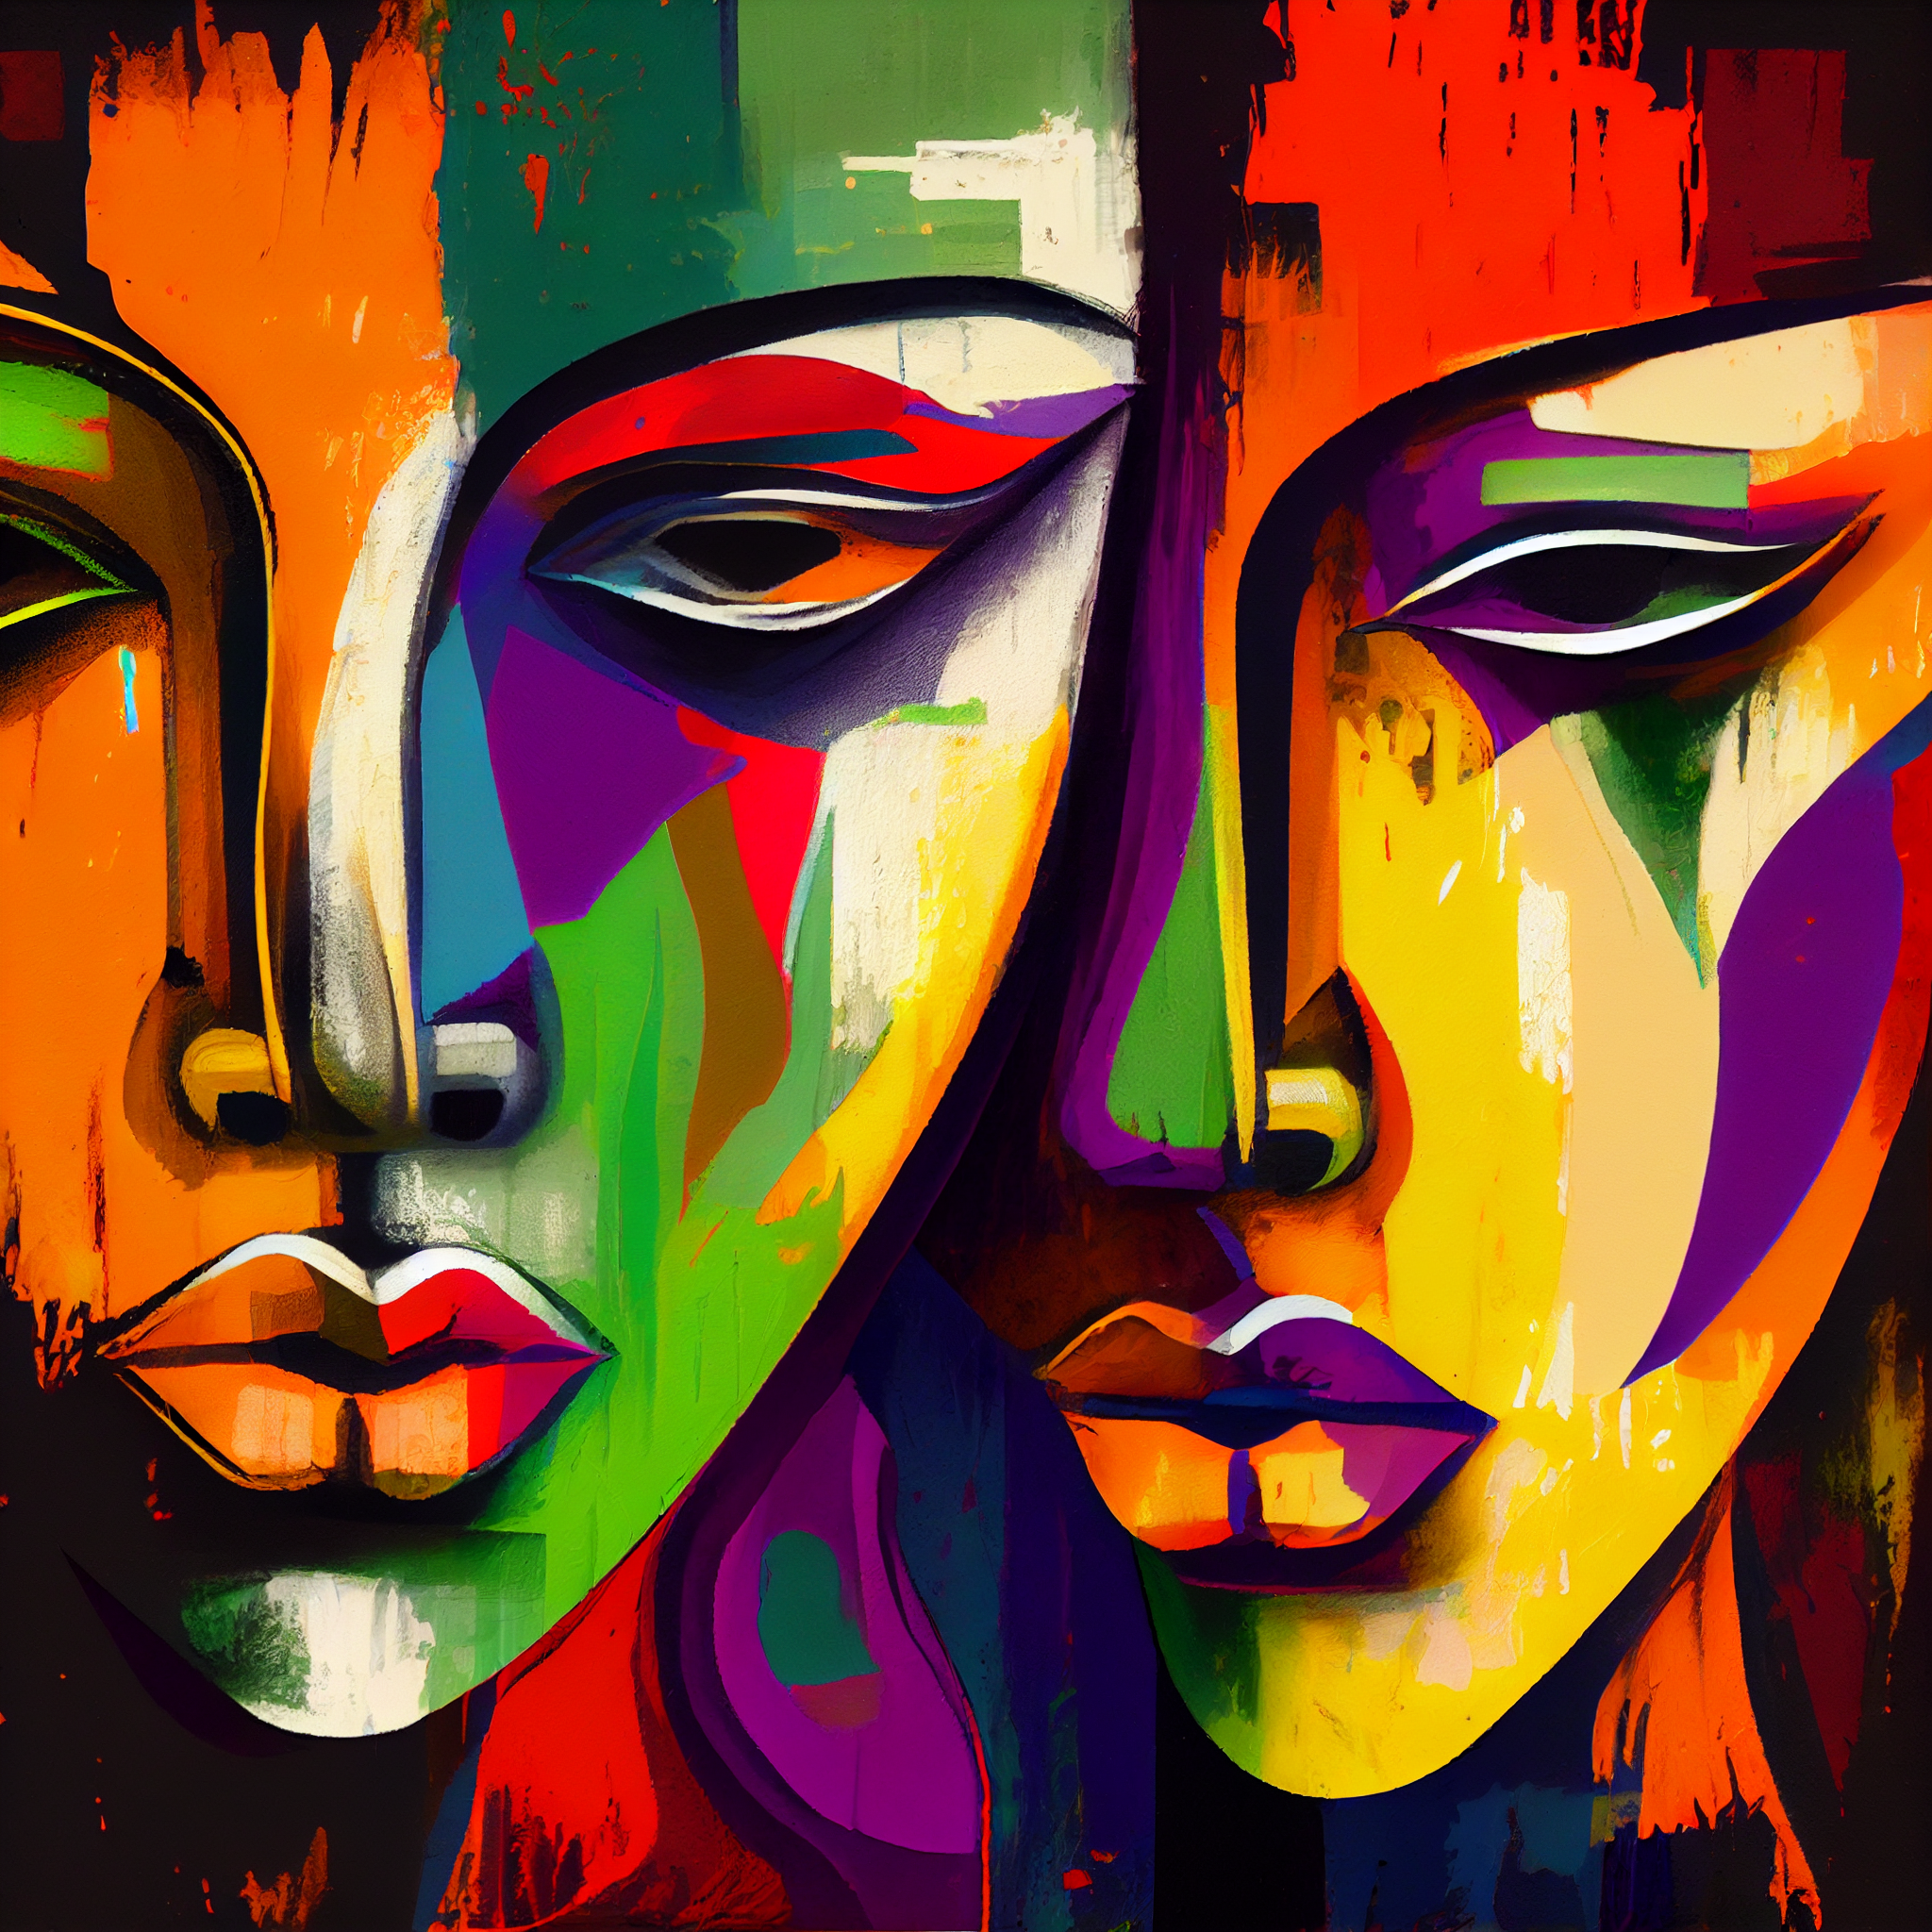 Intimate Connection: A Modern Art Print of Two Faces Using Oil Colors